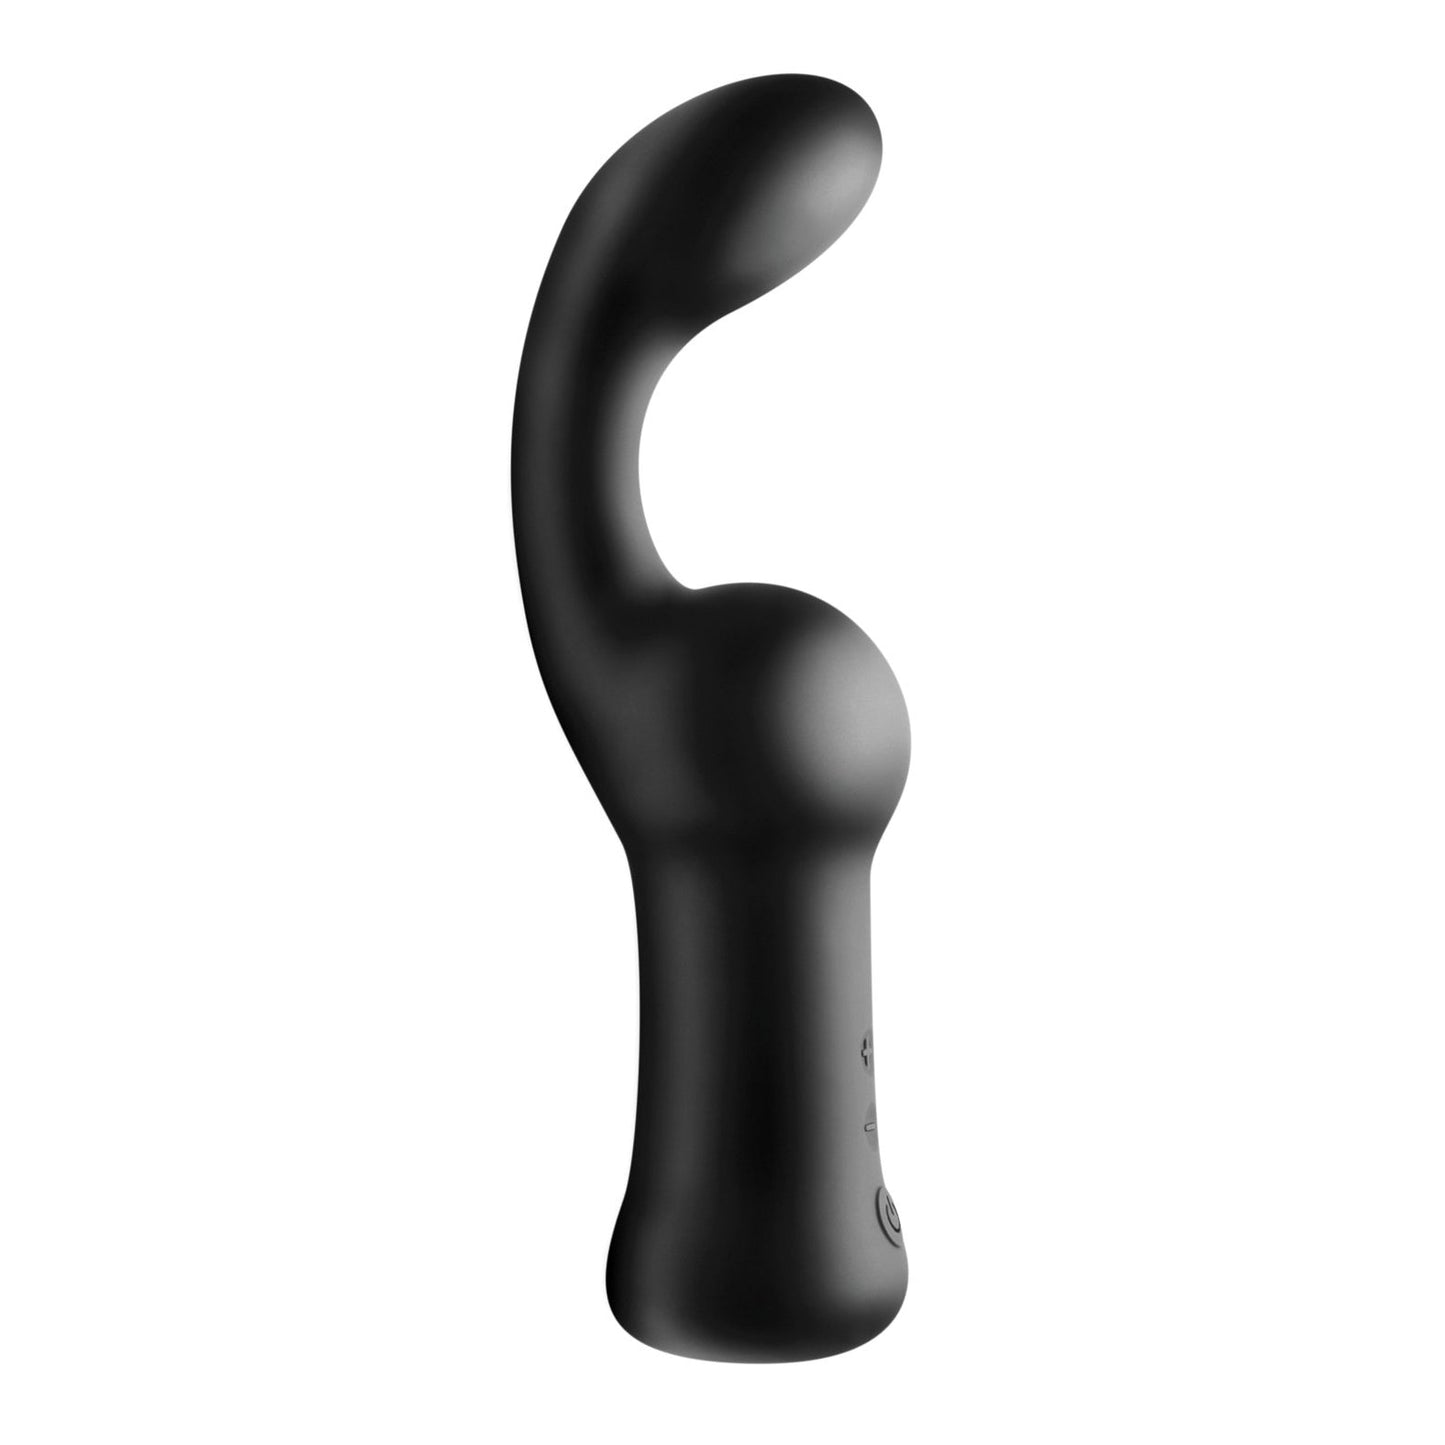 Master Series Pleaser Hook 10x Silicone Anal Vibrator